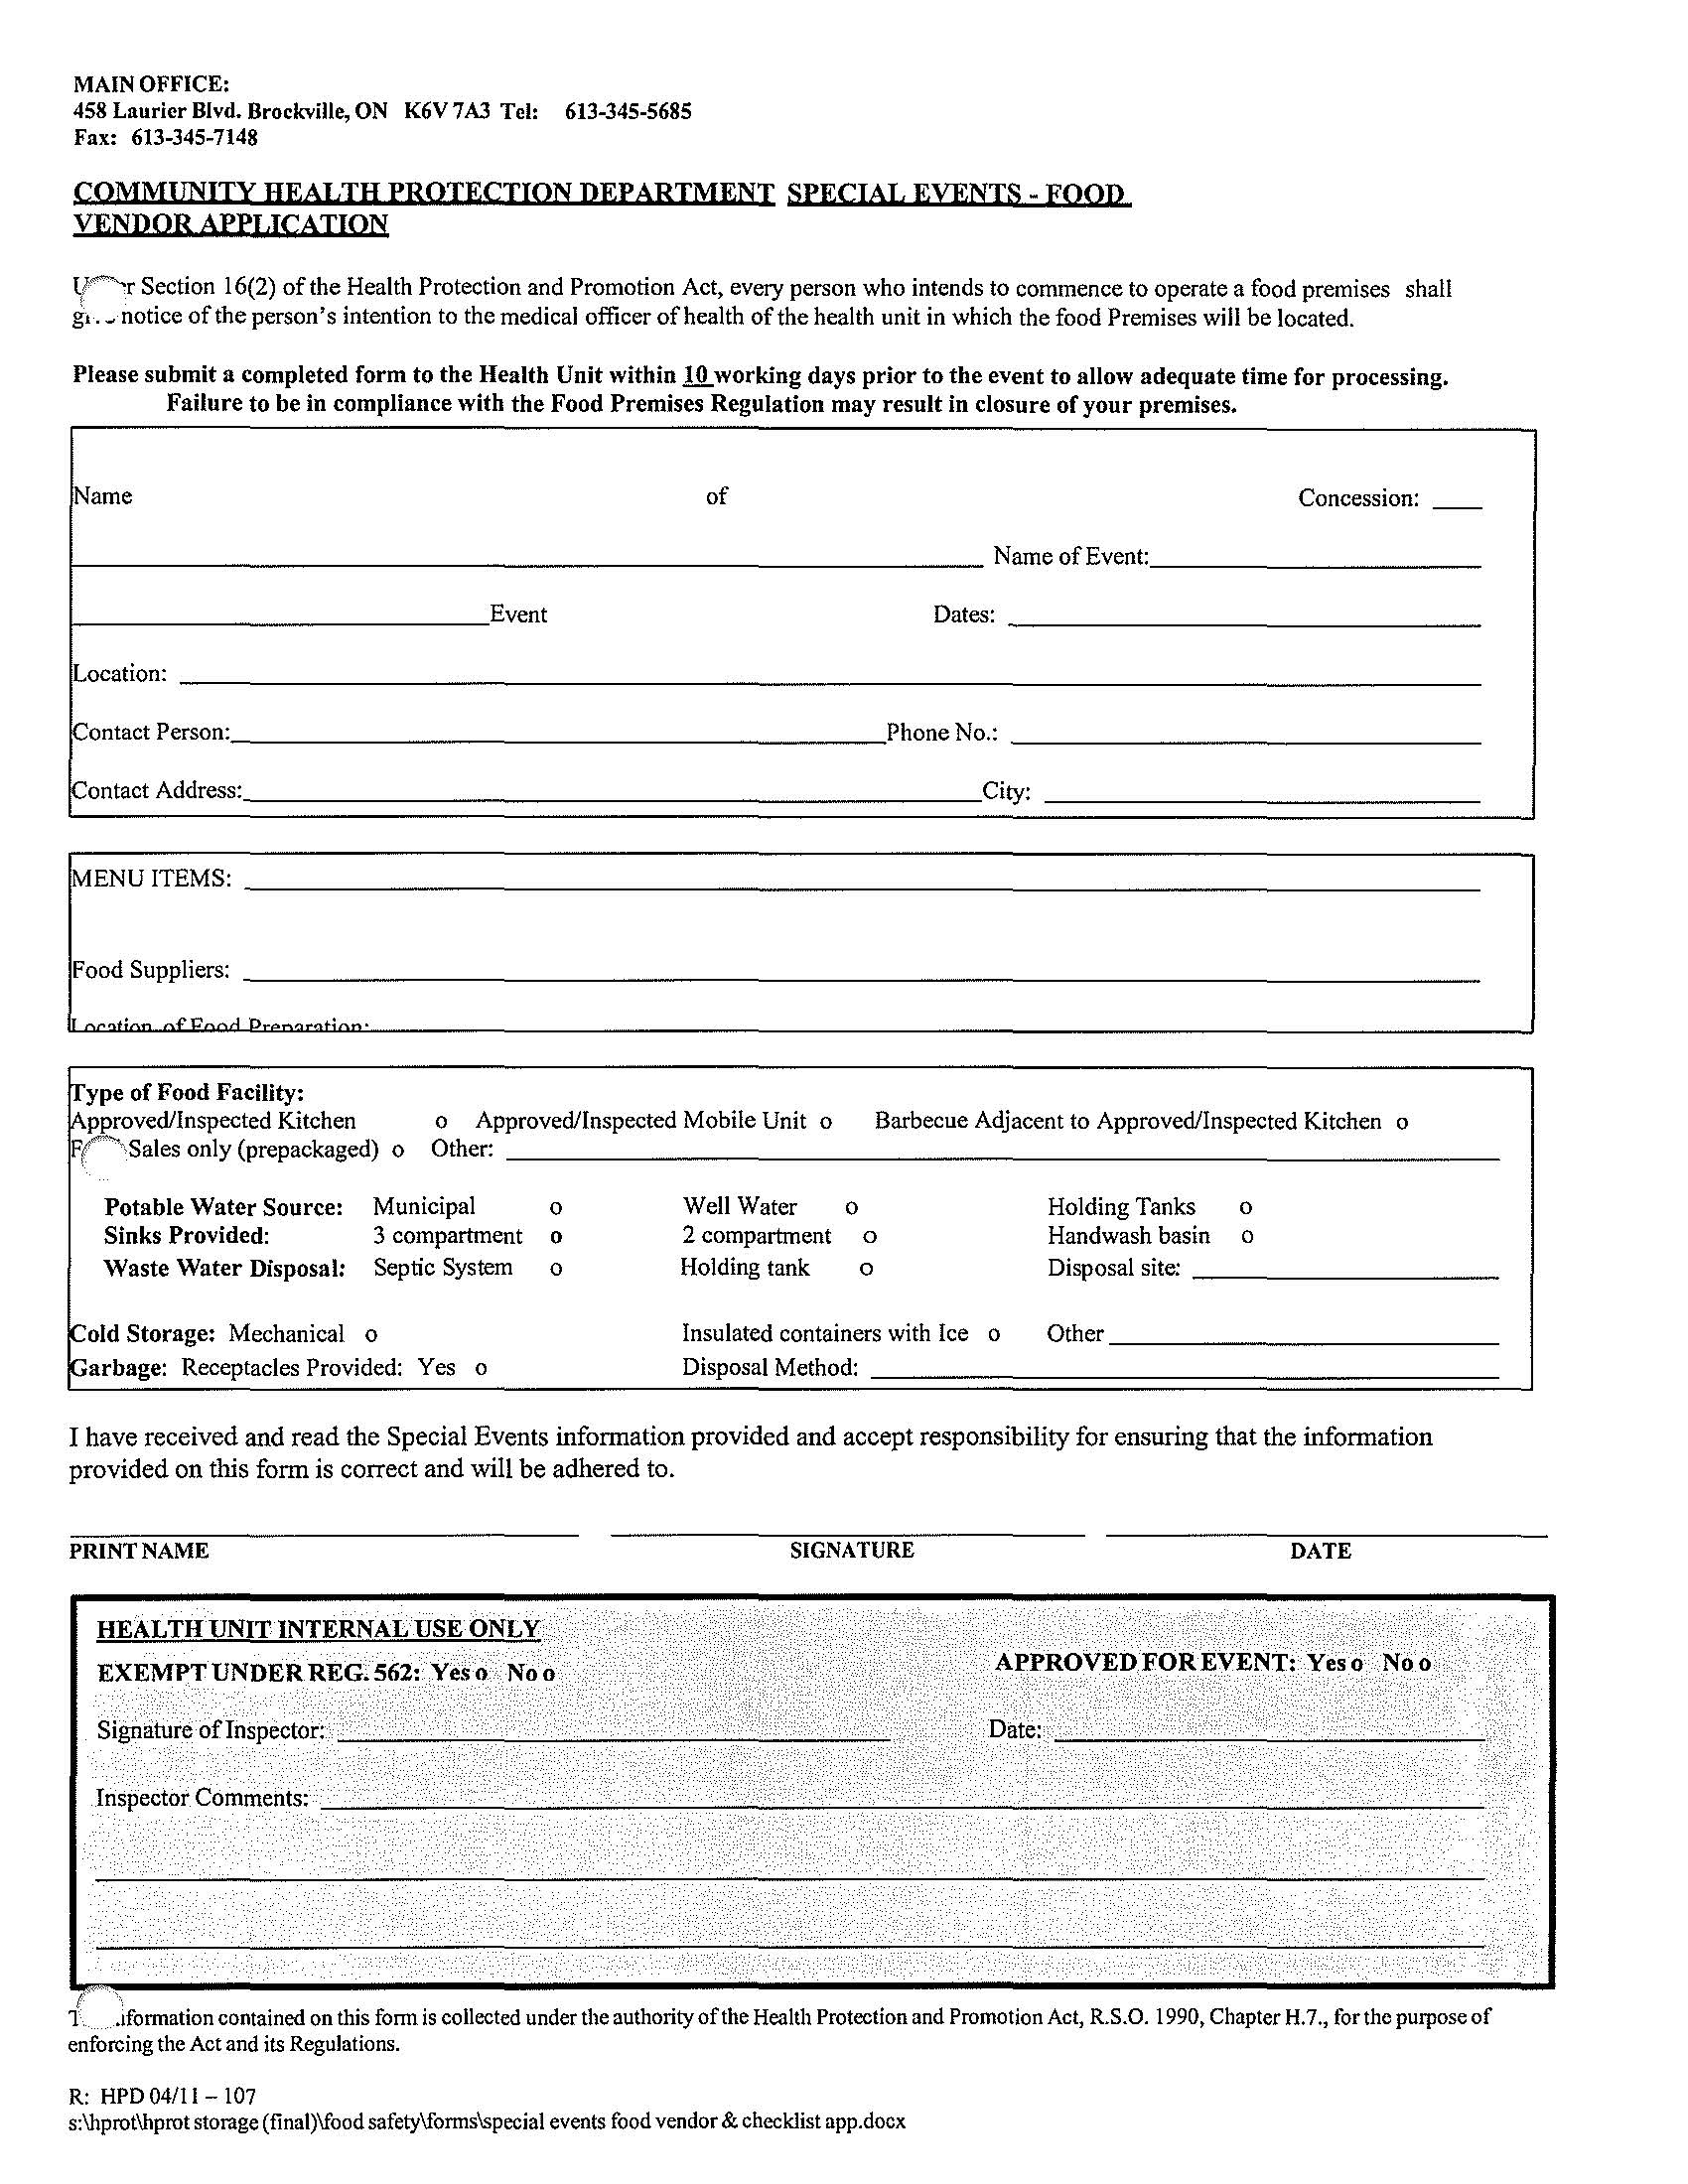 community health protection department special events - food vendor application.  Page 01